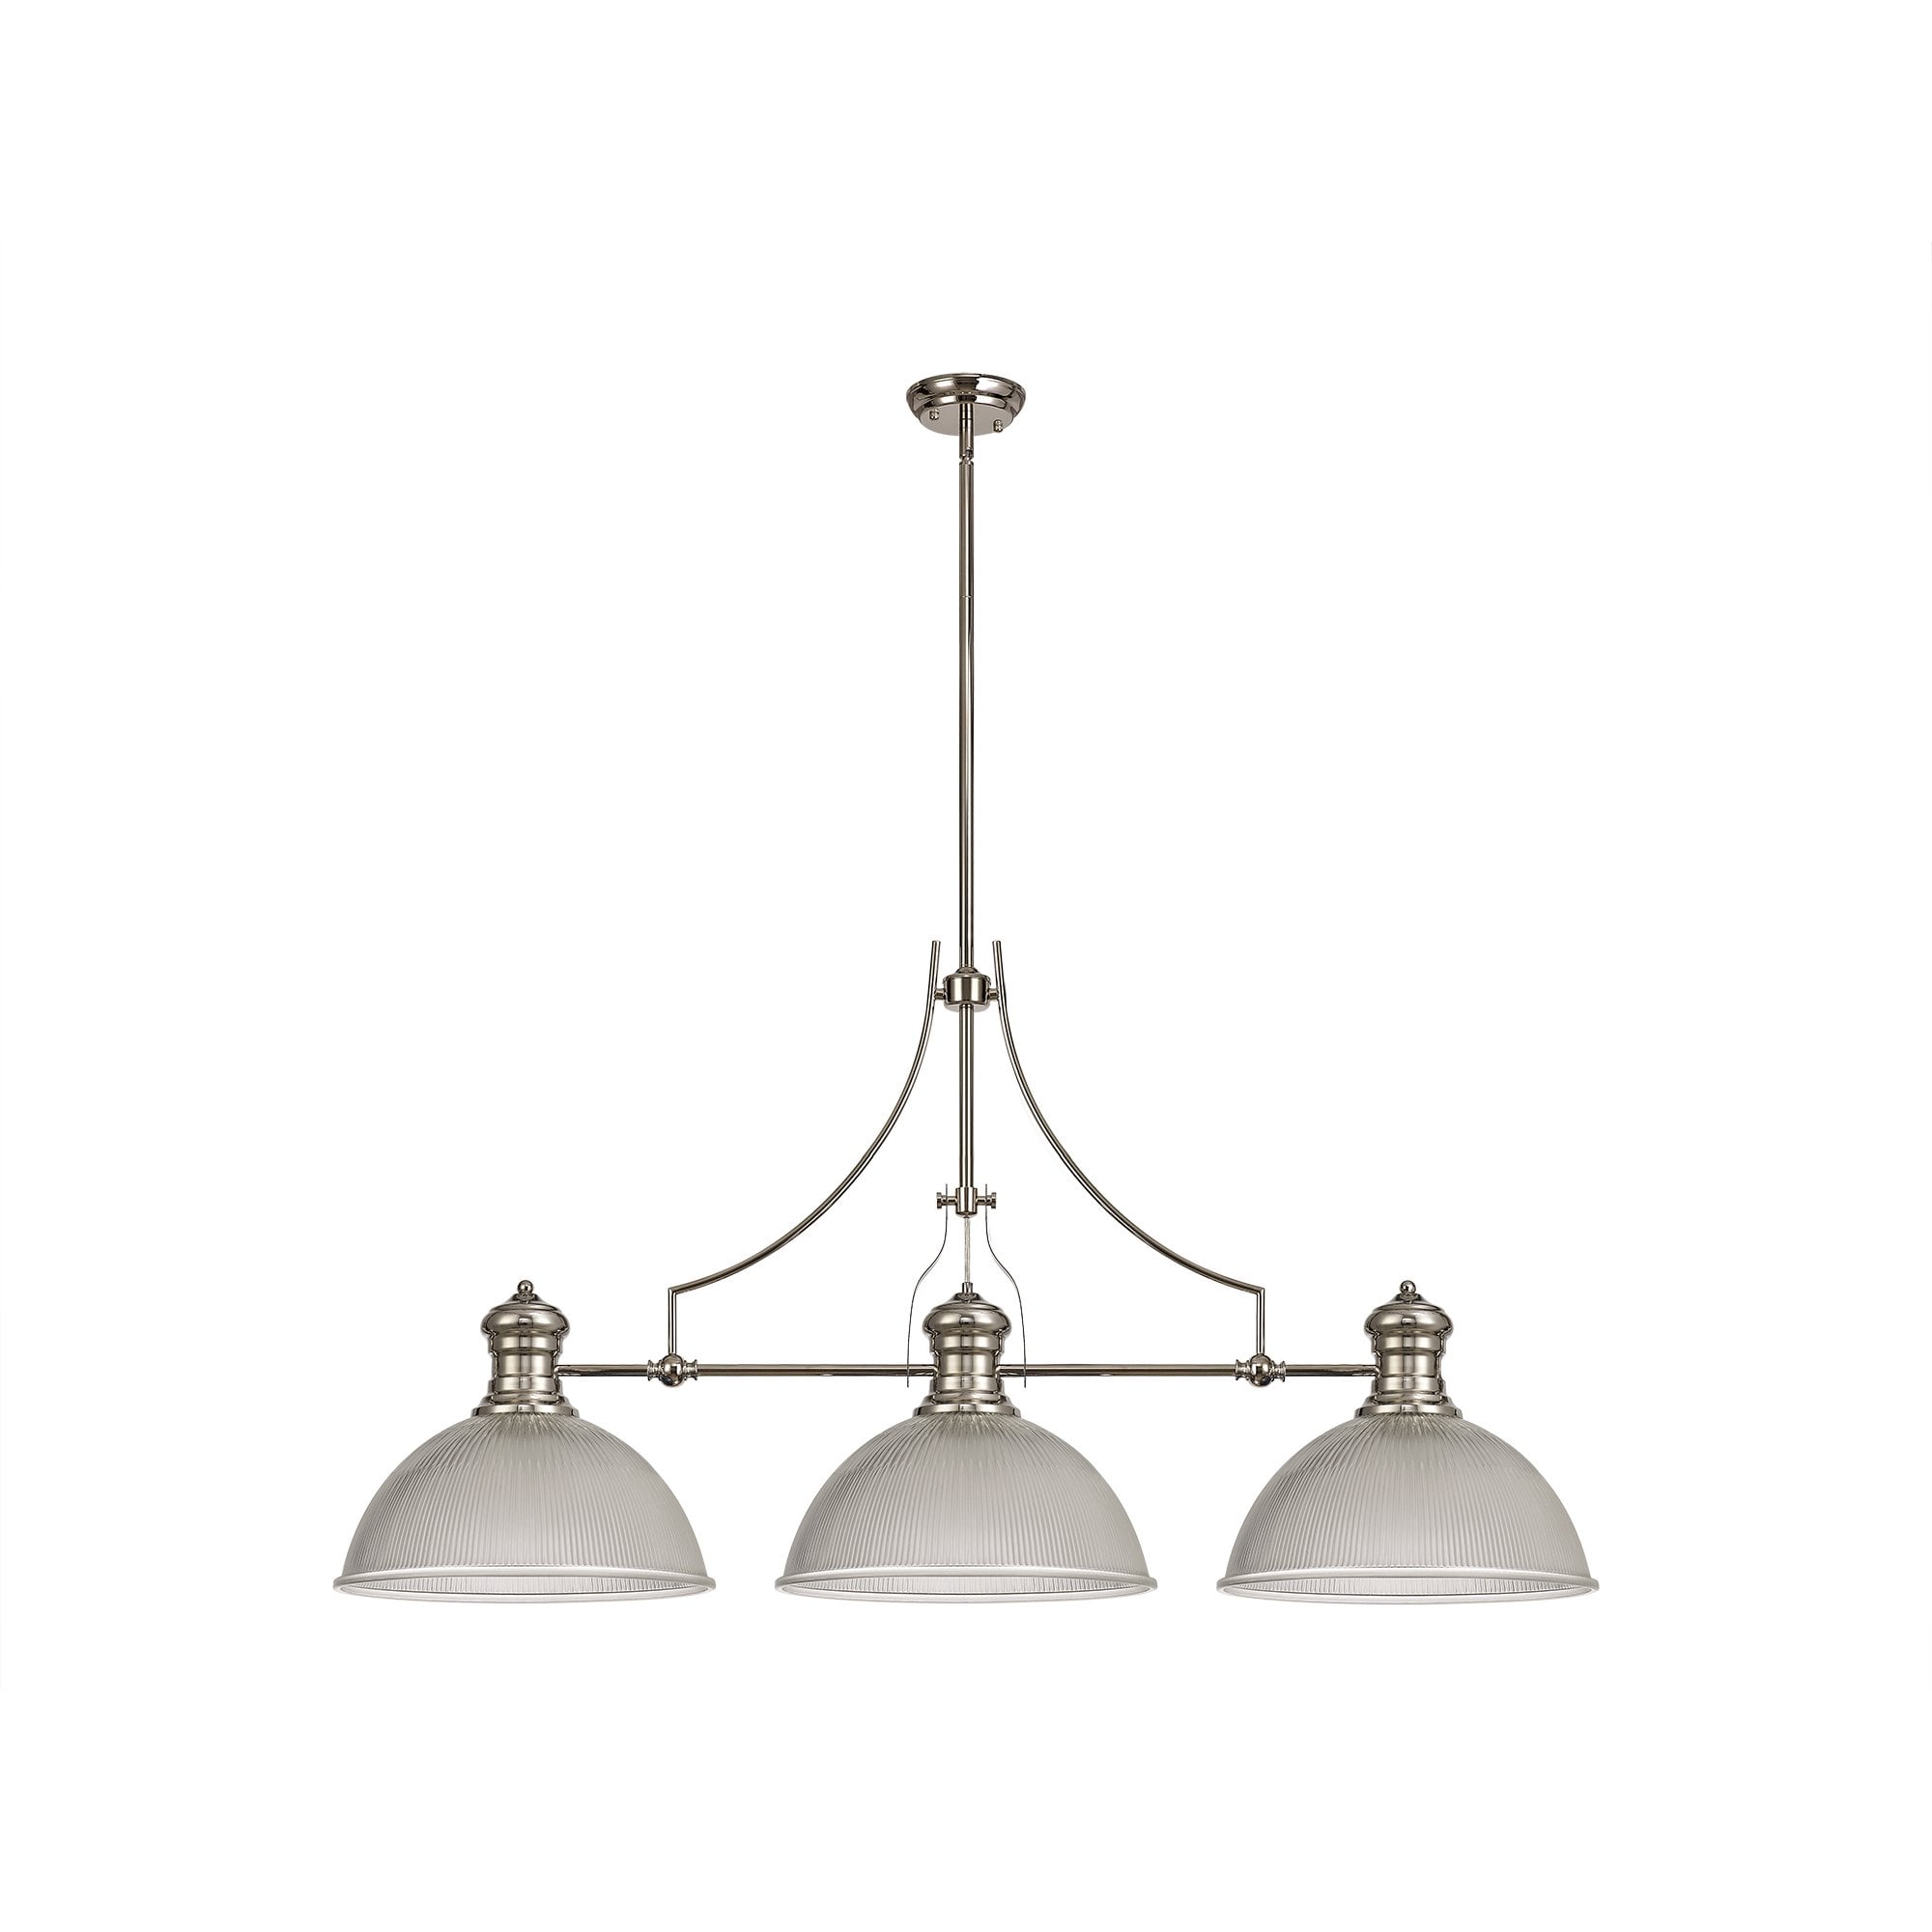 3 Light Telescopic Pendant E27 With 38cm Dome Glass Shade, Polished Nickel/Clear